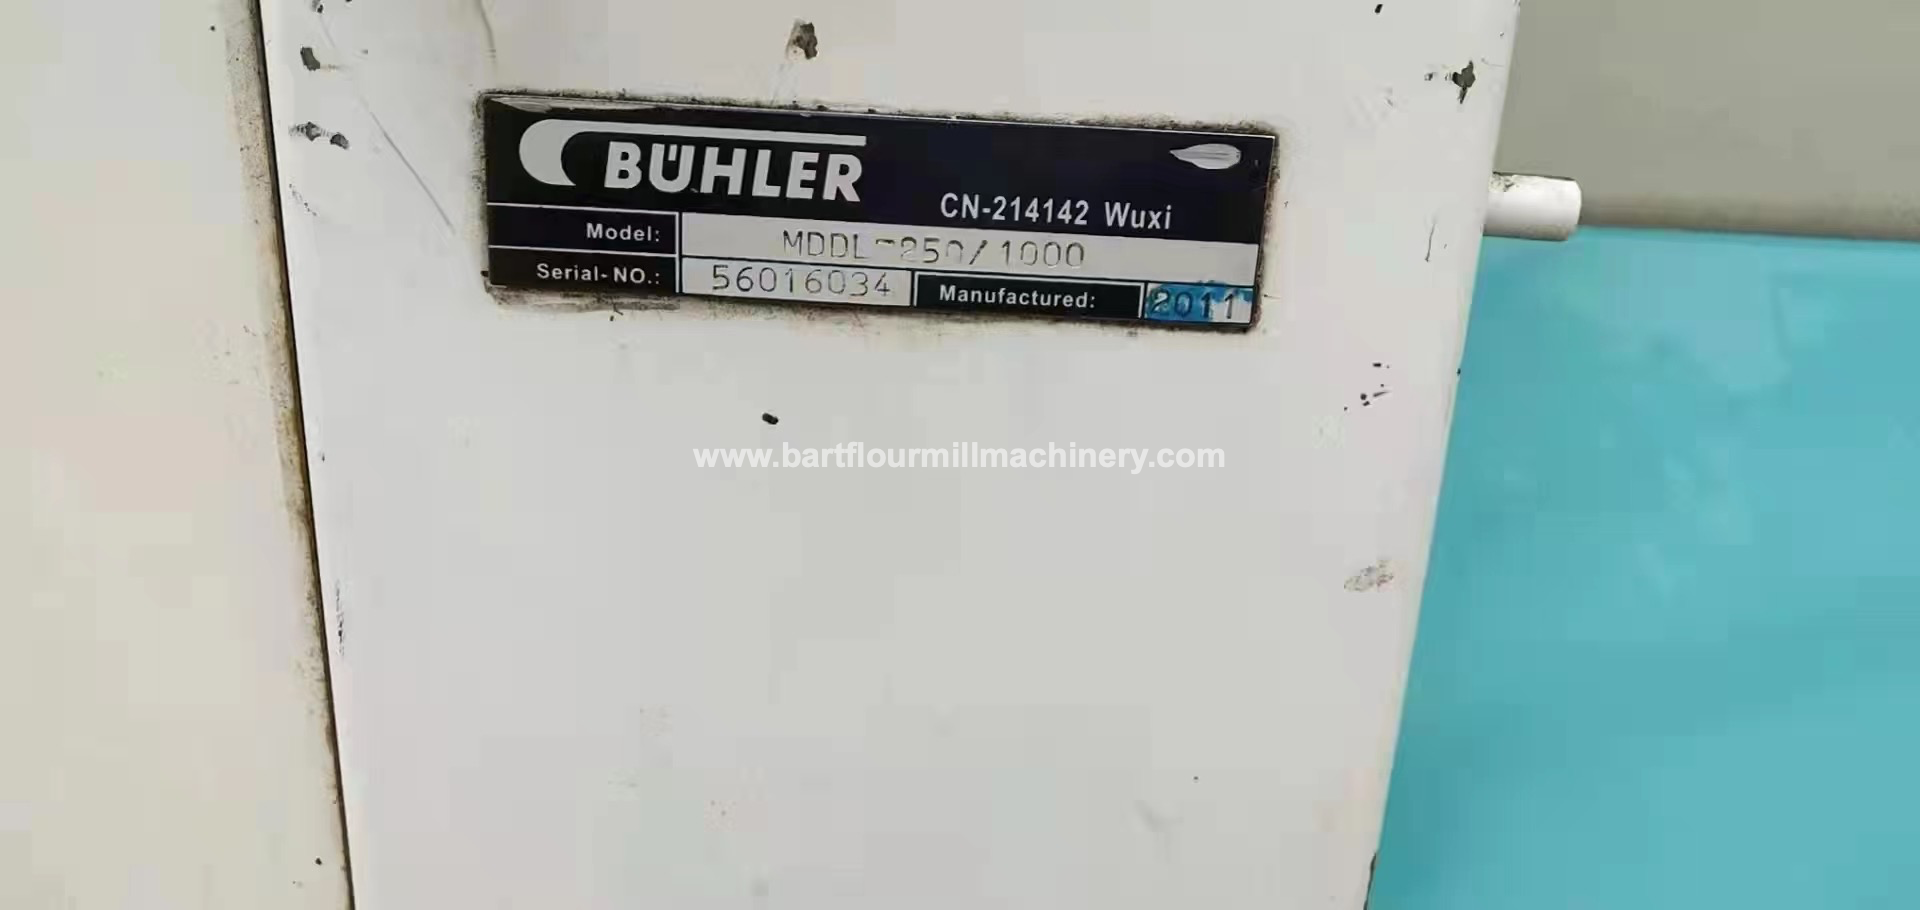 Used Buhler MDDL Roller Mills with Belt Timing System Smooth Rollers